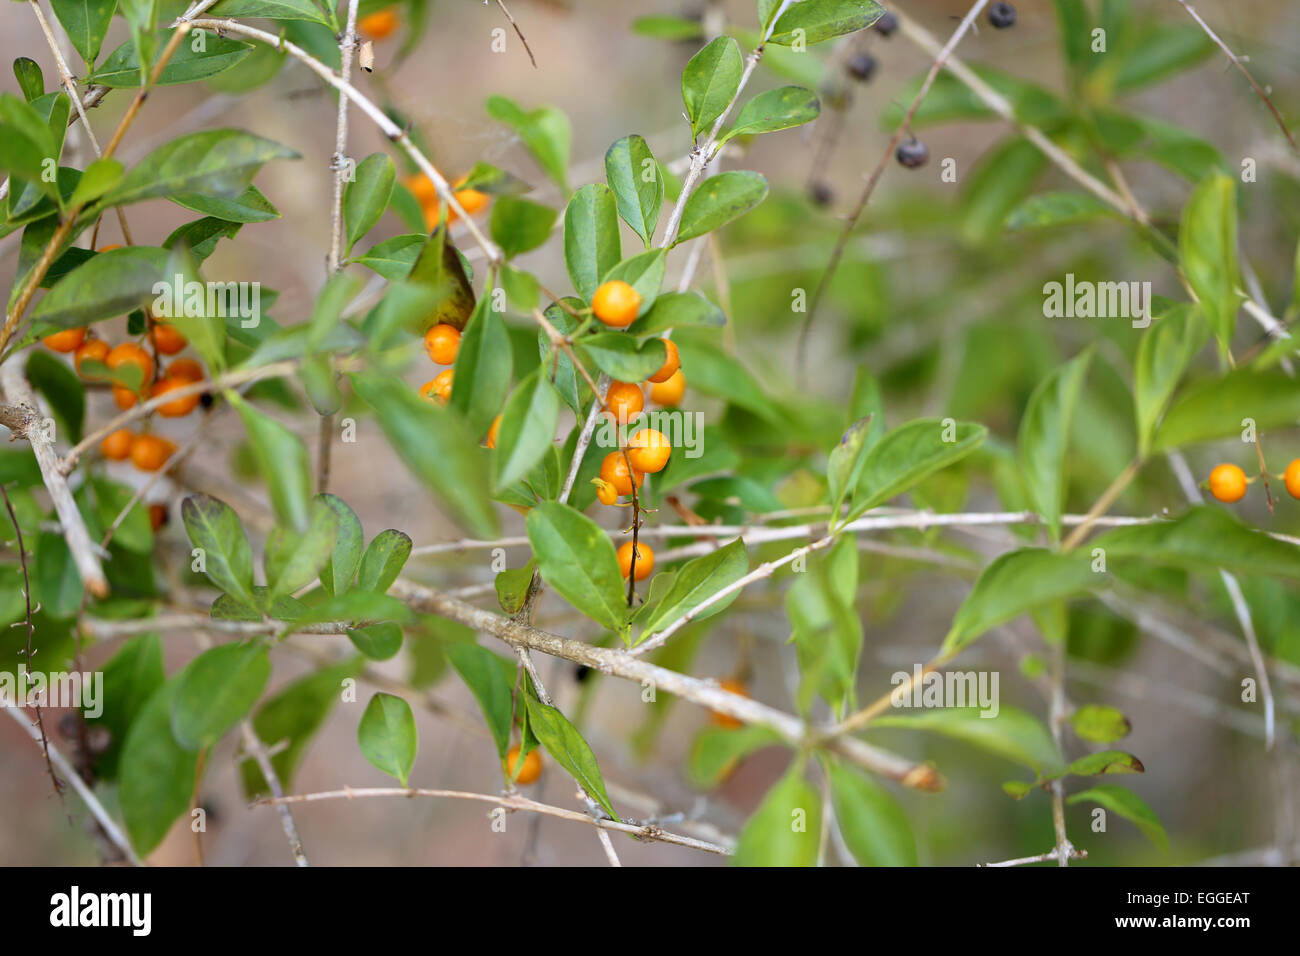 Yellow berries weigh on green Bush photographed closeup Stock Photo